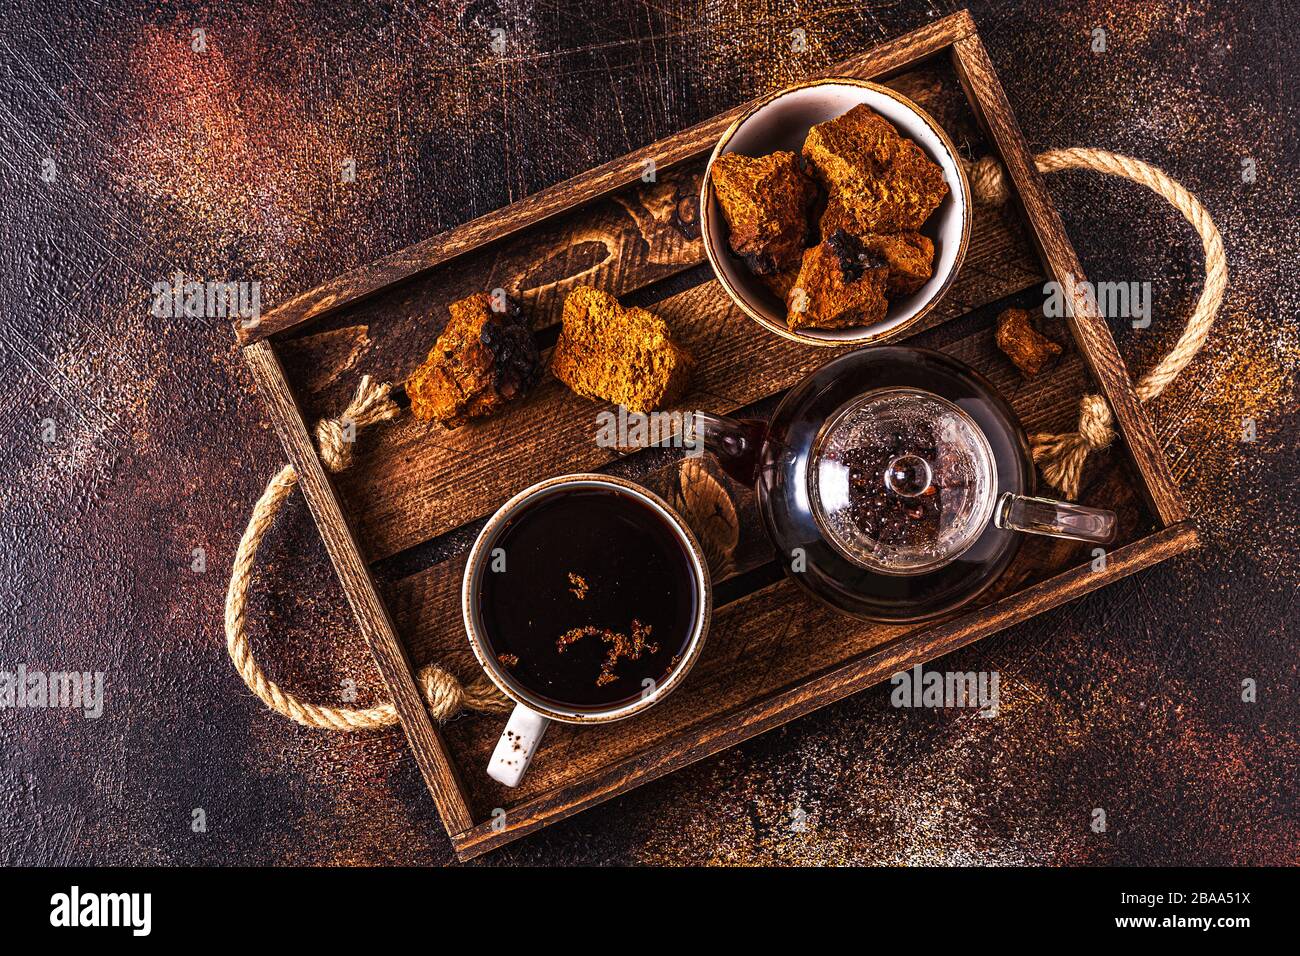 Chaga tea - a strong antioxidant, boosts immune system, has detox quality, improves digestive. Stock Photo